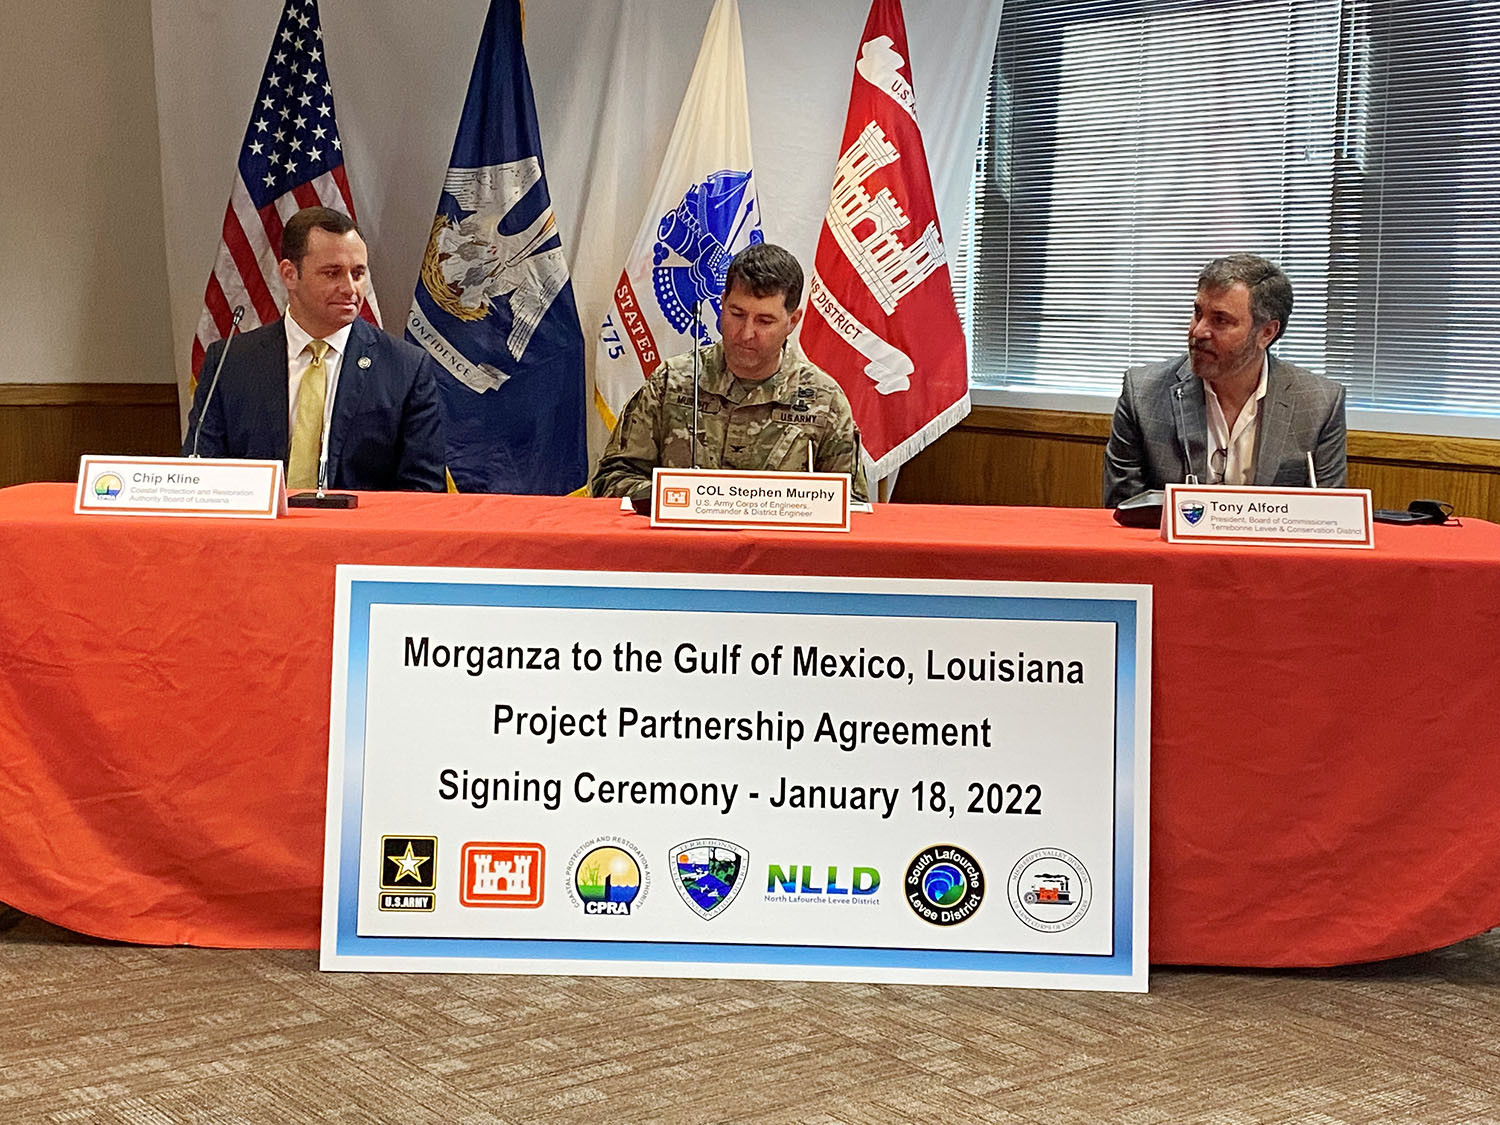 From left at the signing ceremony are Chip Kline, chairman of the Louisiana Coastal Protection & Restoration Authority; Col Stephen Murphy, New Orleans Engineer District commander; and Tony Alford, president of the Terrebonne Levee and & Conservation District board of commissioners.